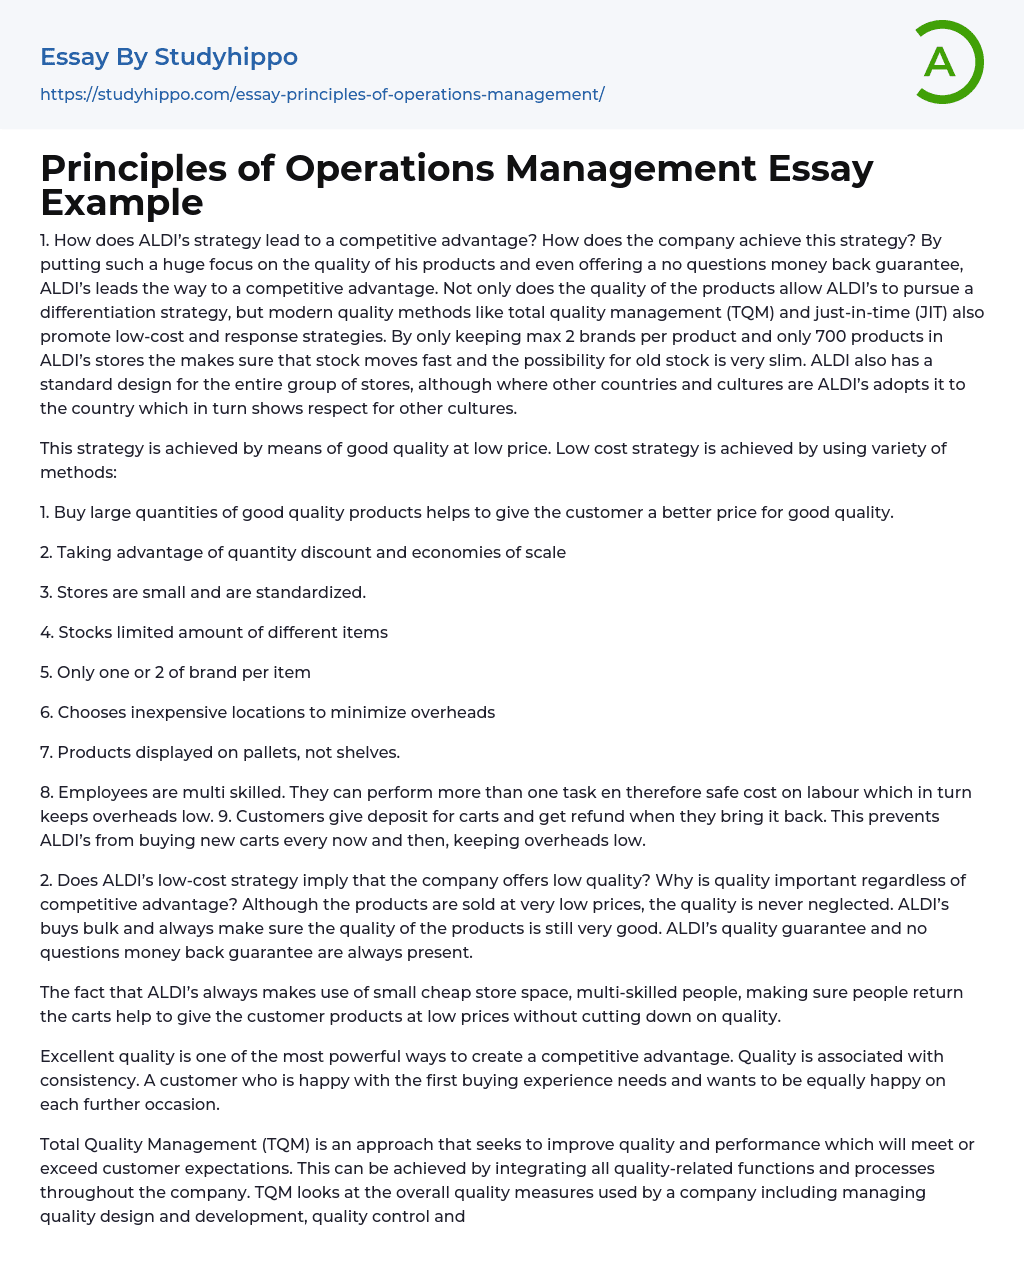 Principles of Operations Management Essay Example